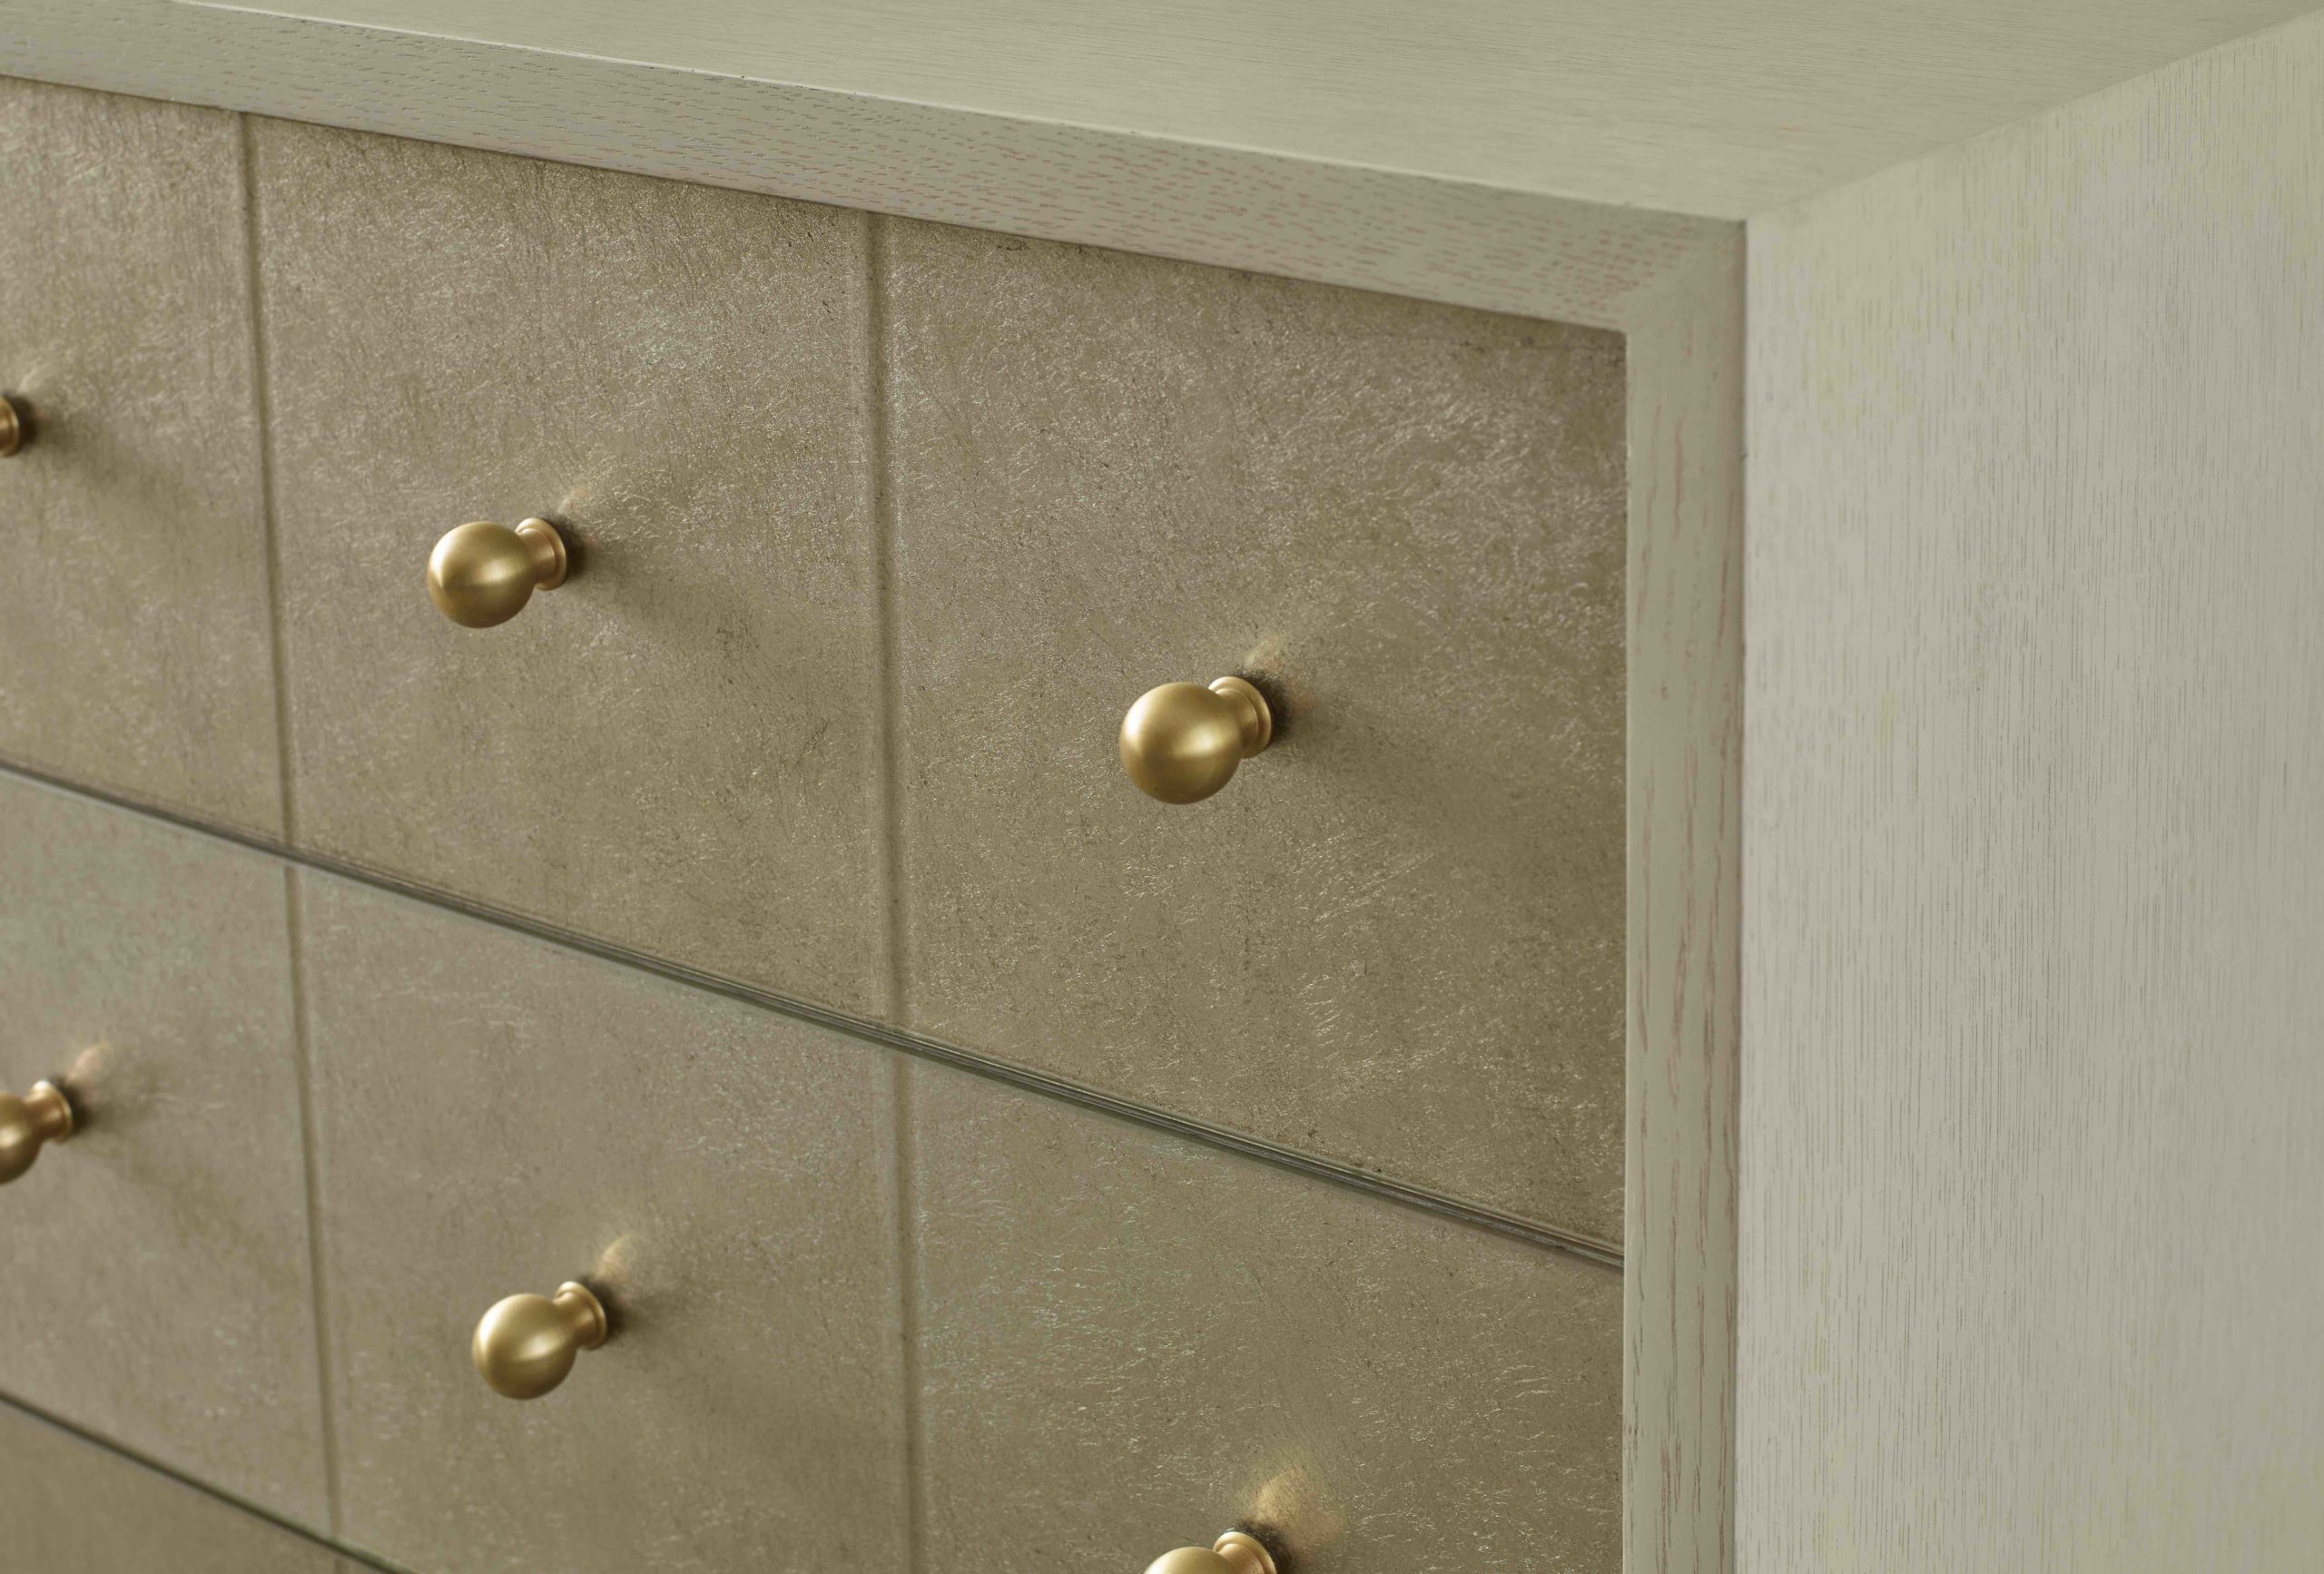 Baker_products_WNWN_couture_dresser_BAA3200_DETAIL-scaled-2